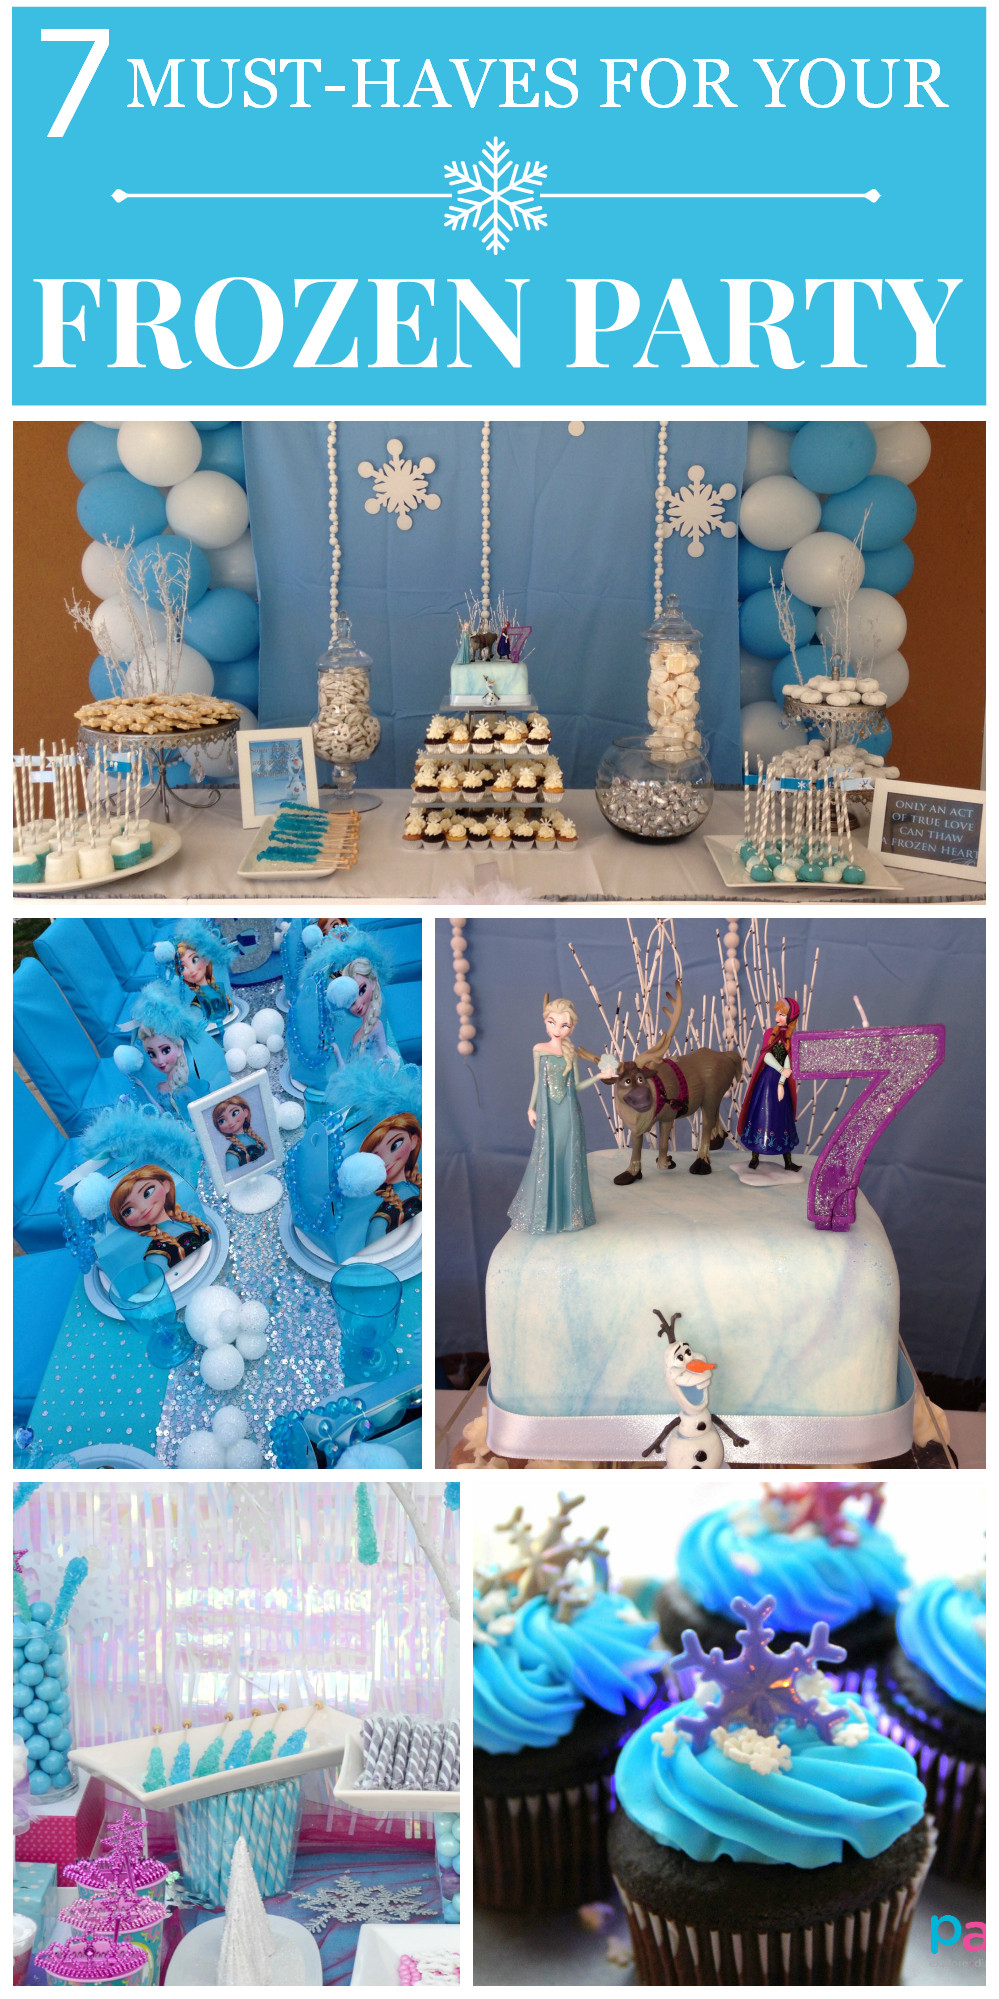 Frozen Birthday Party Decorations
 7 Things You Must Have at Your Frozen Party